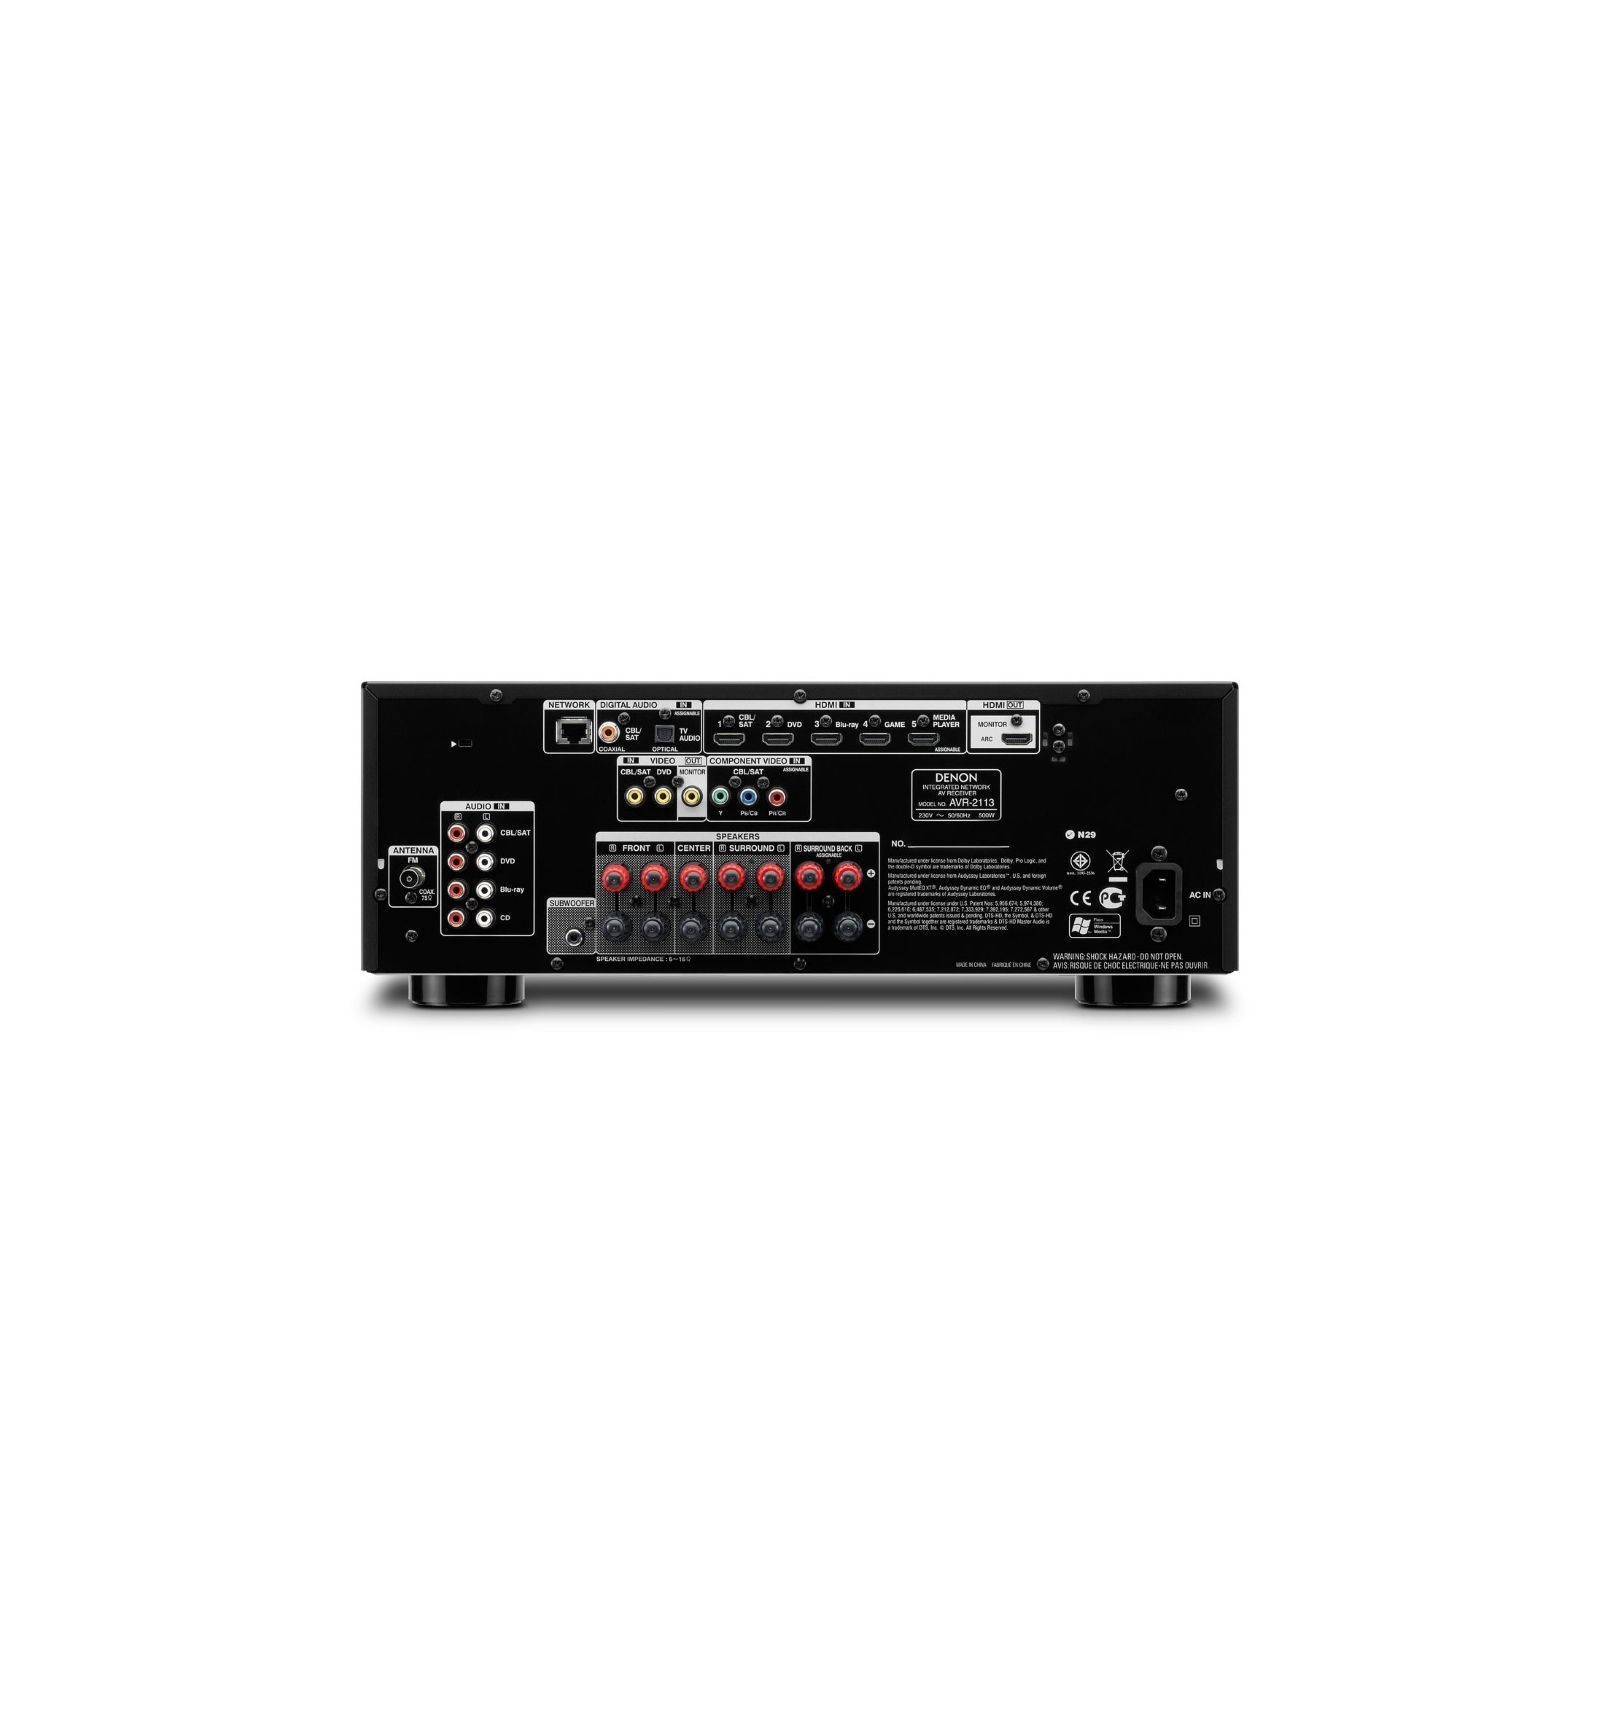 denon avr 2113 networking home theater receiver with airplay